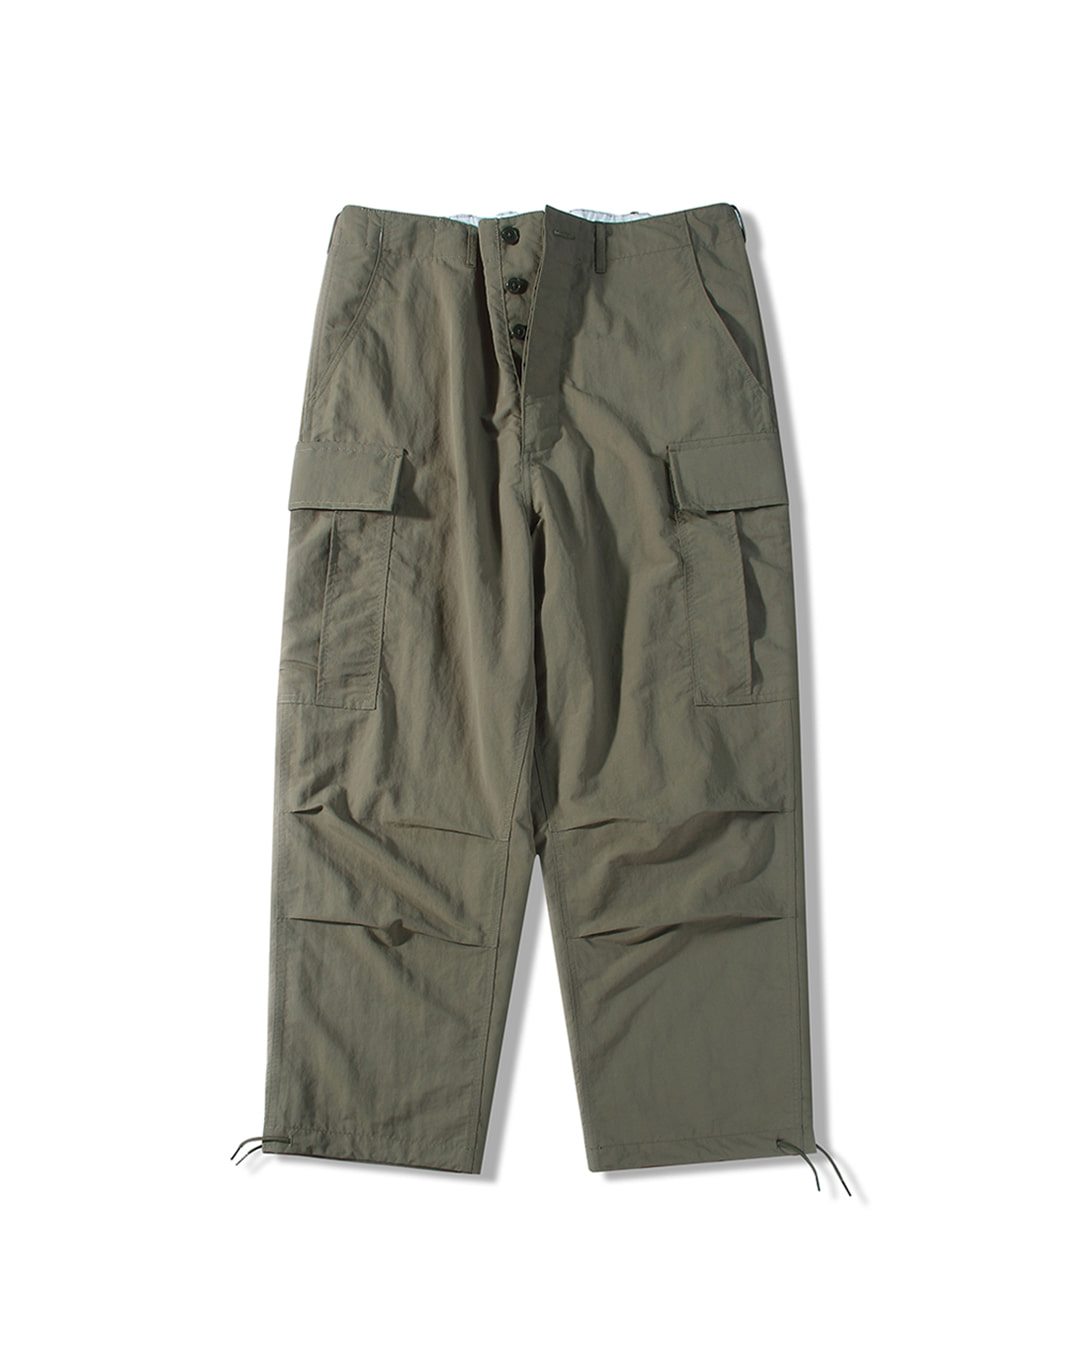 M-51 TROUSERS (olive green)